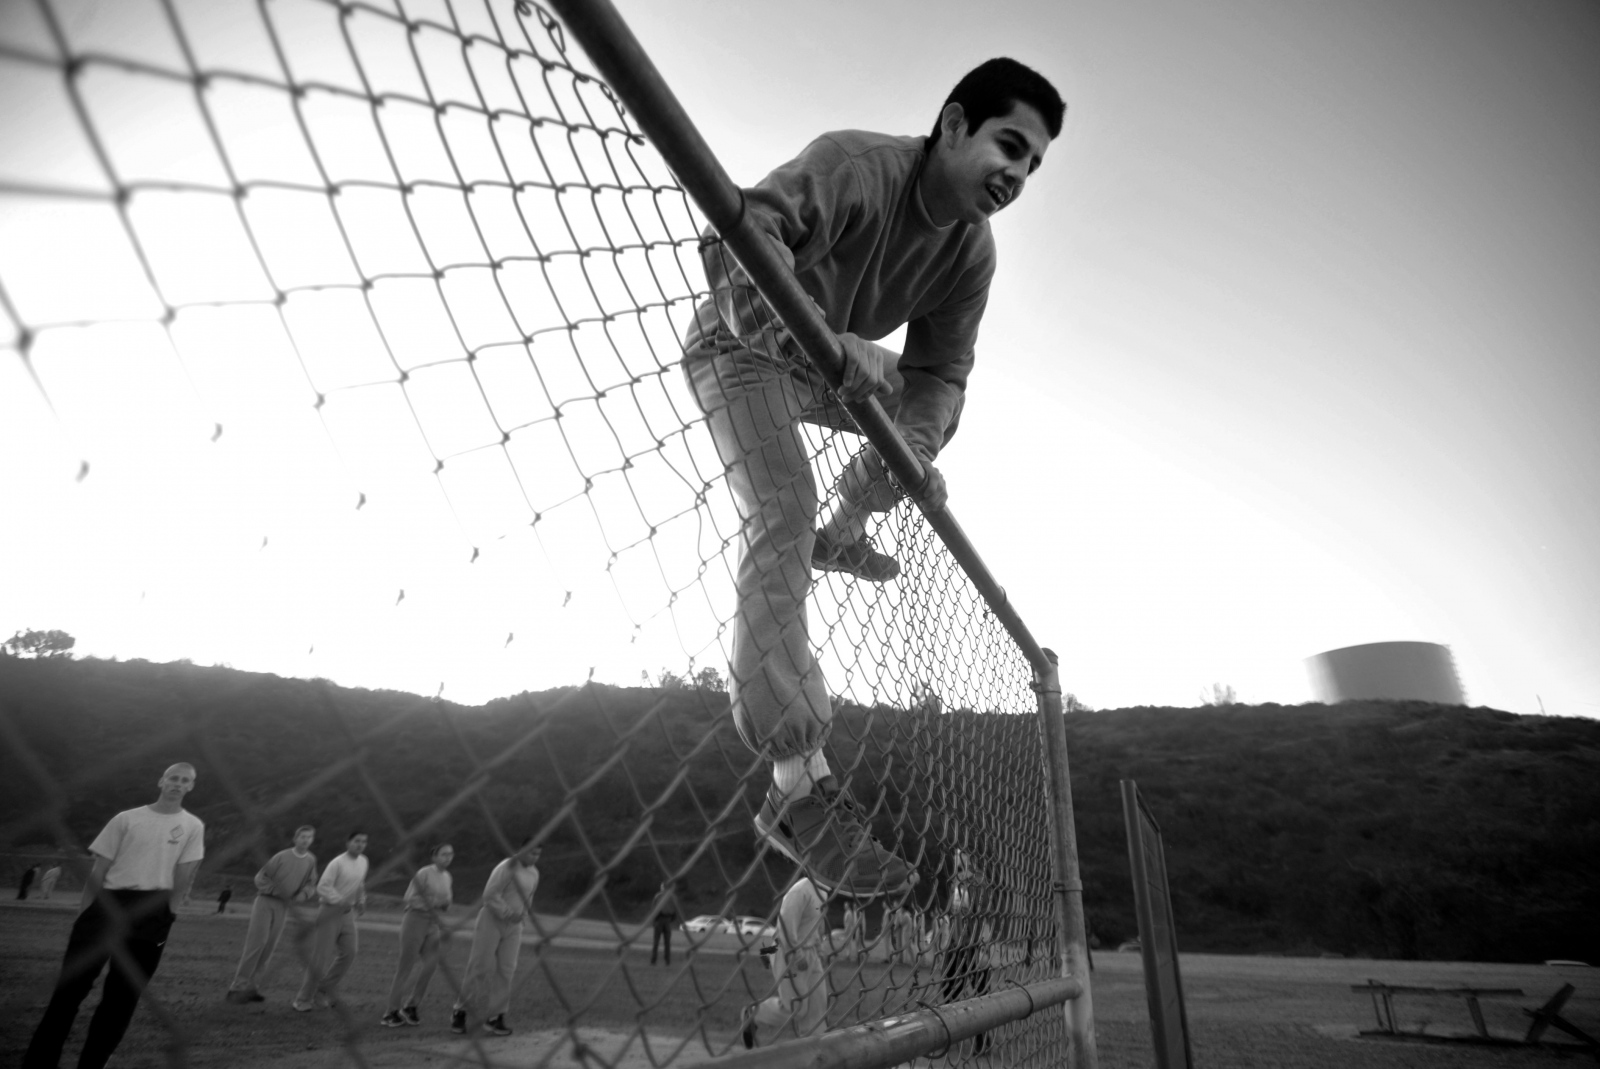 An Explorer recruit jumps over a fence during physical training at Pitchess Detention Center on...